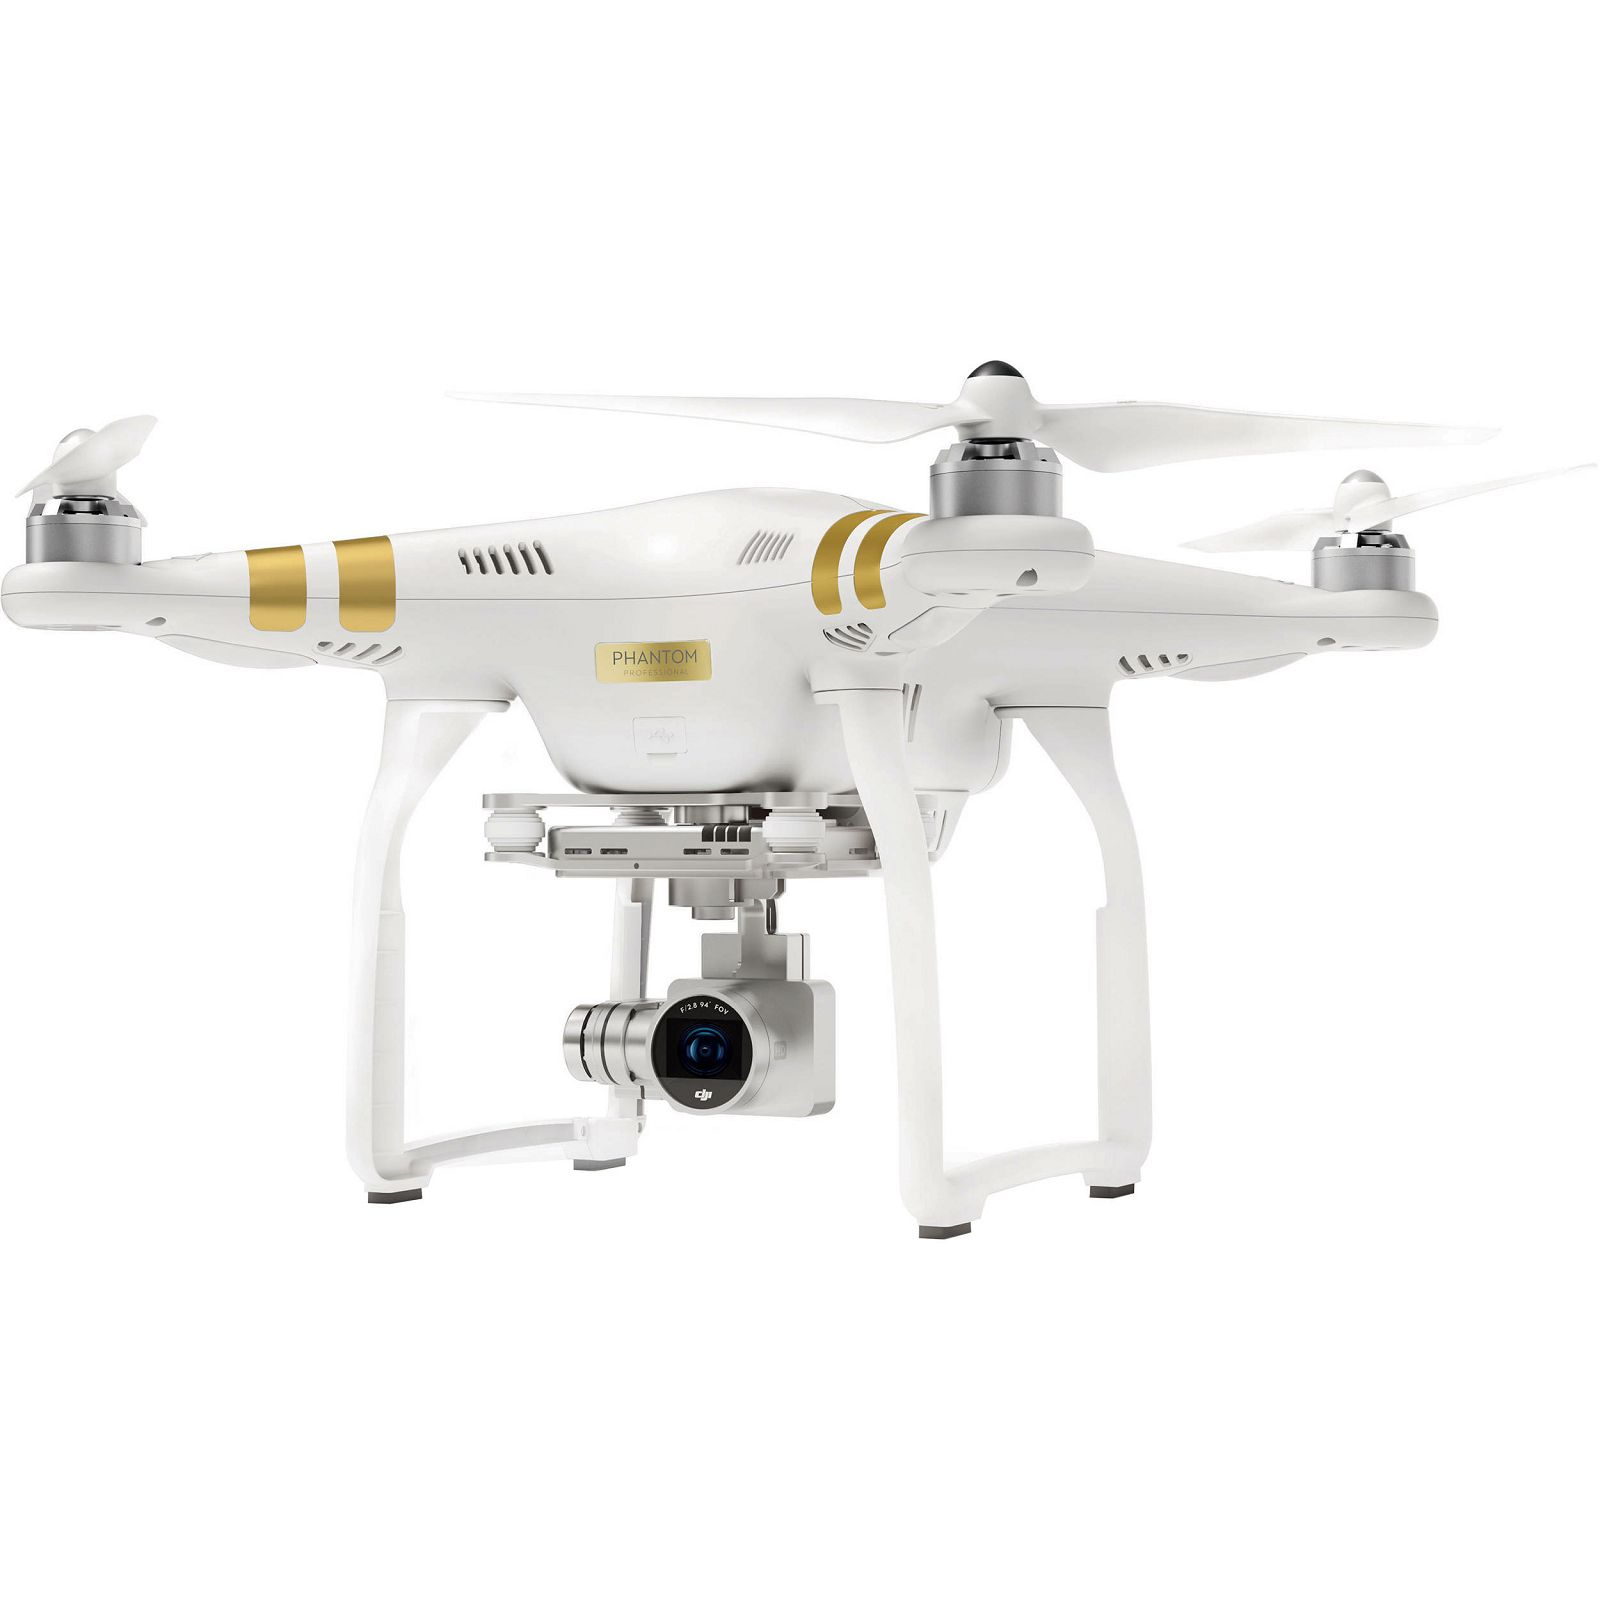 DJI Phantom 3 Spare Part 110 Aircraft (Excludes Remote Controller and Battery Charger) (Pro)